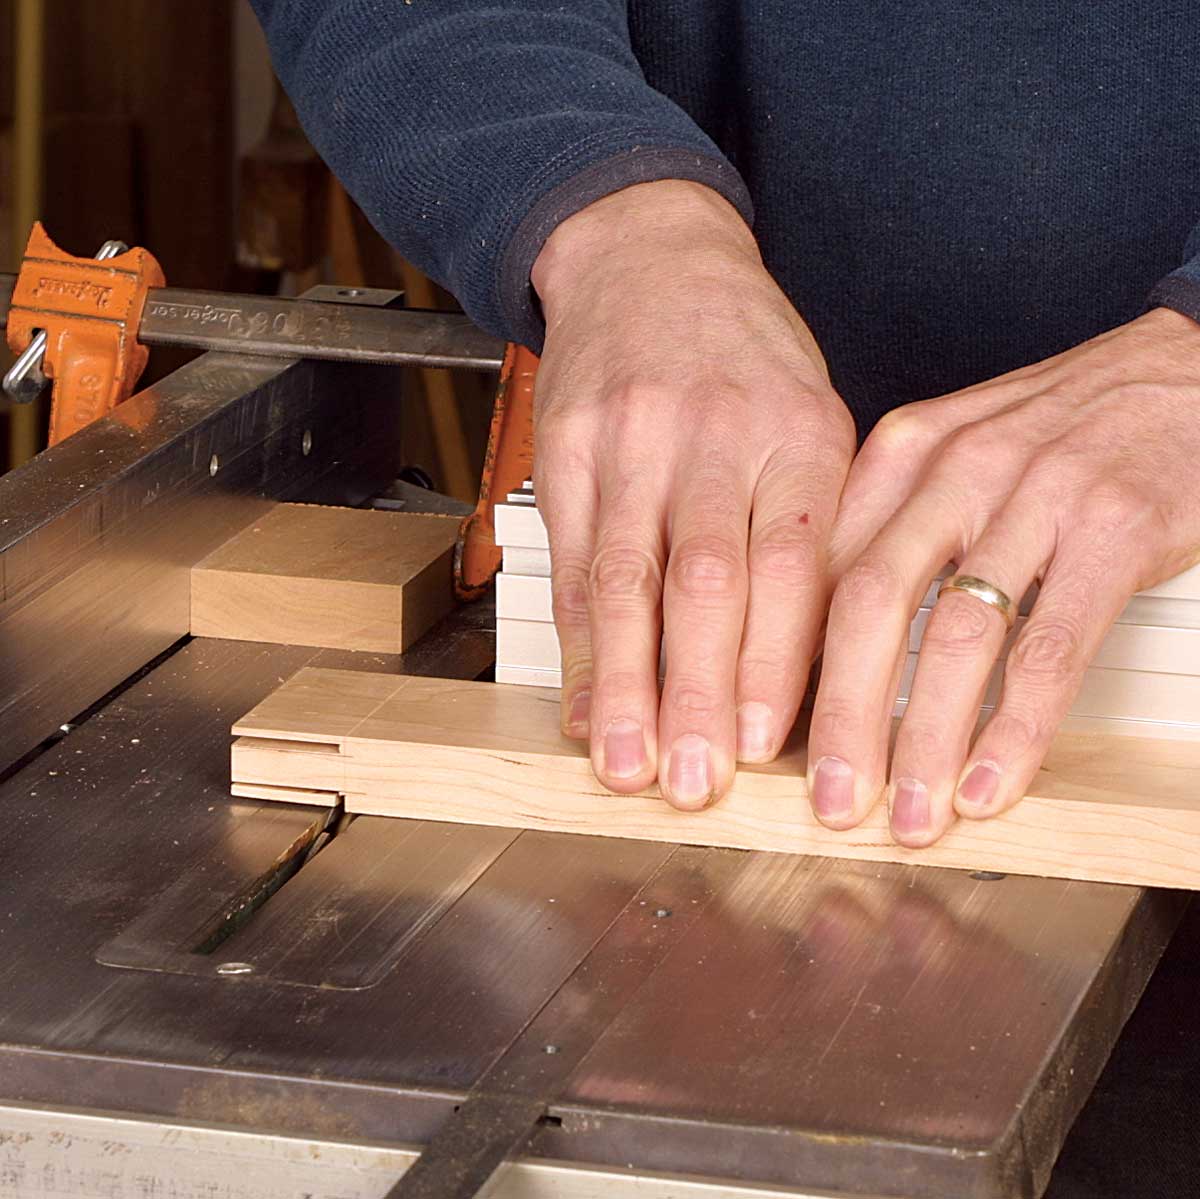 Use the miter gauge and a stop block. For consistent tenon shoulders, clamp the stop block to the rip fence and make the shoulder cuts using a miter gauge.